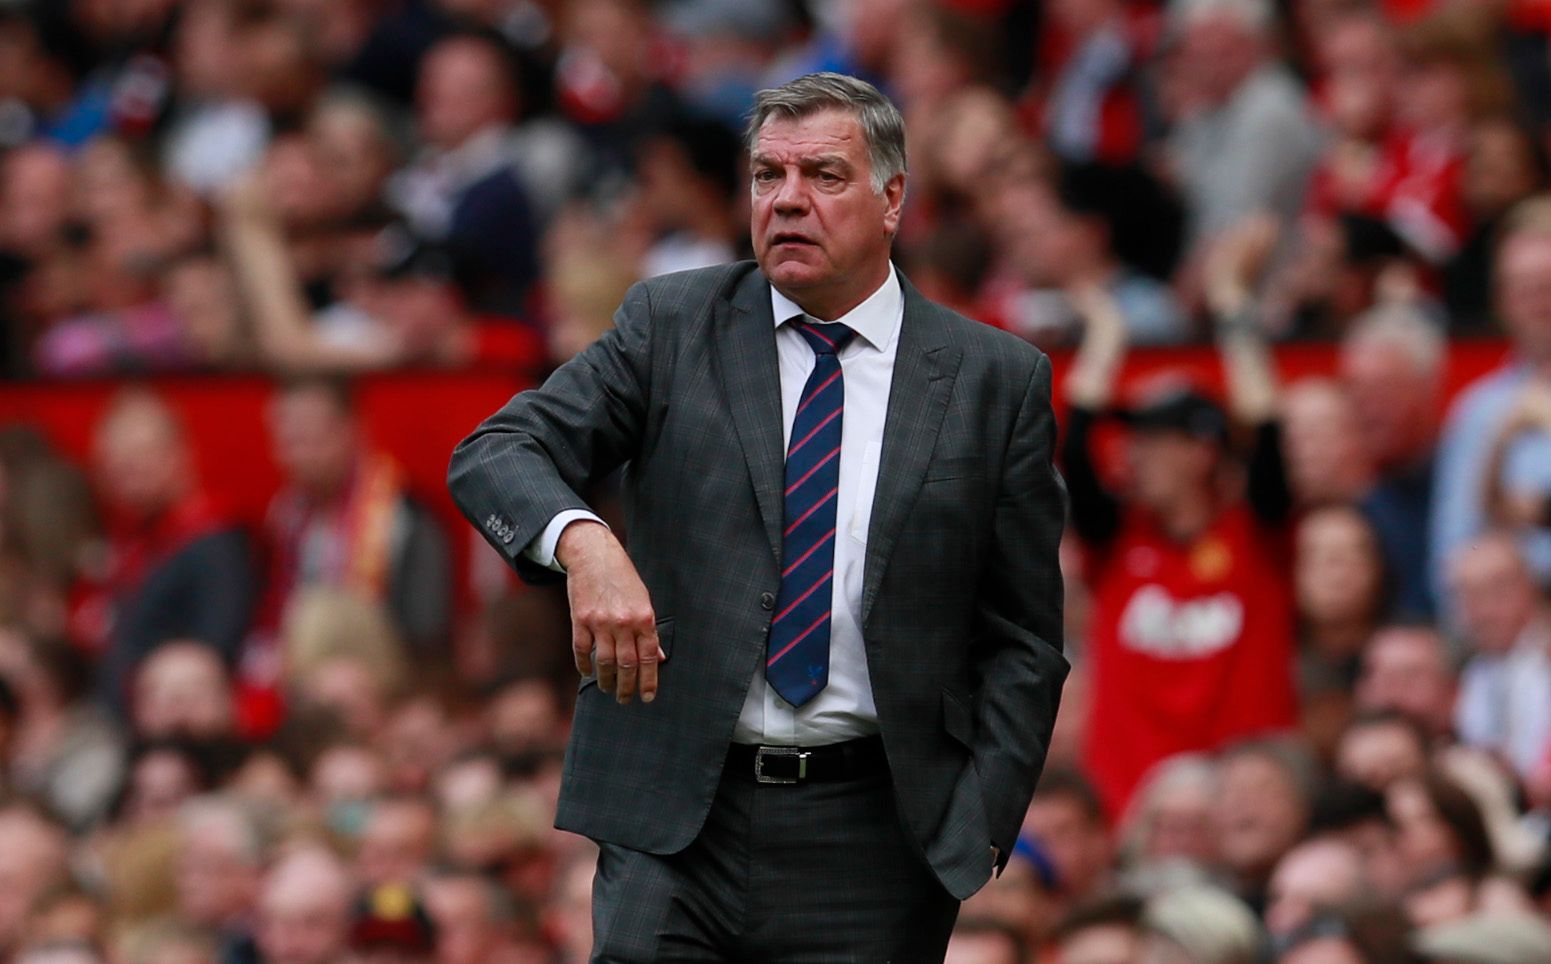 Britain Football Soccer - Manchester United v Crystal Palace - Premier League - Old Trafford - 21/5/17 Crystal Palace manager Sam Allardyce Action Images via Reuters / Jason Cairnduff Livepic EDITORIAL USE ONLY. No use with unauthorized audio, video, data, fixture lists, club/league logos or 